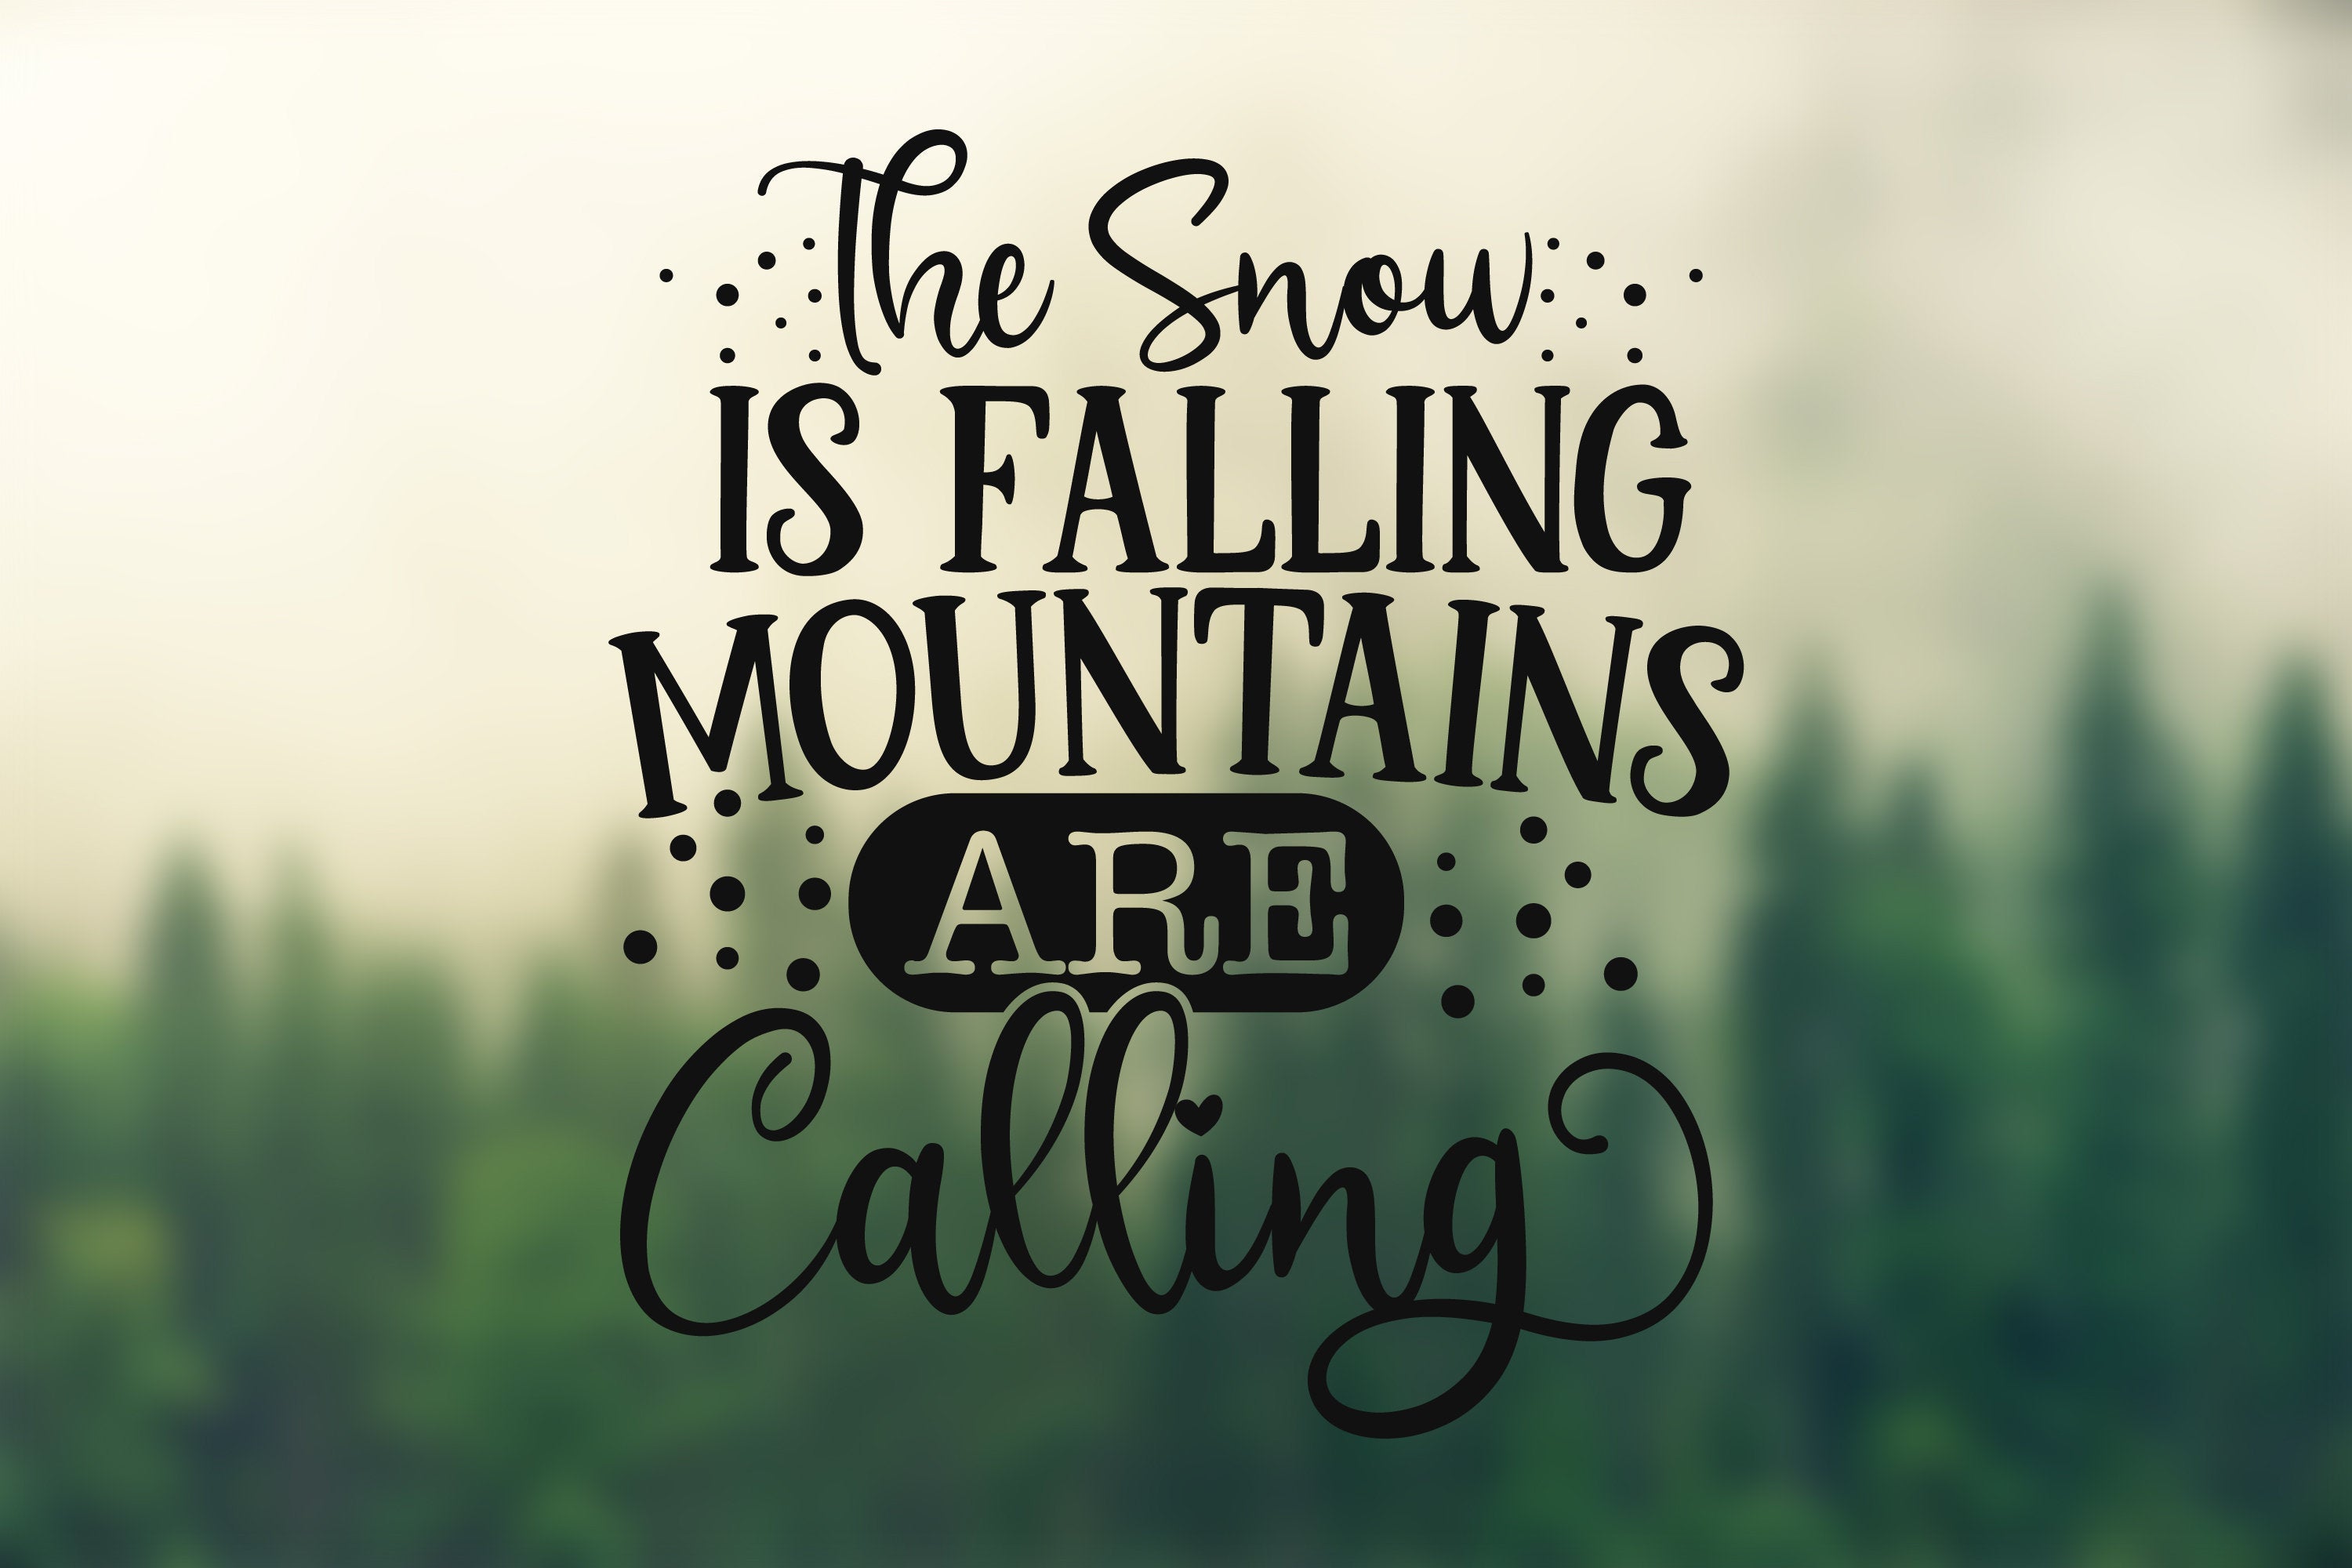 Car Vinyl Decal - The Snow is Falling Mountains are Calling - Permanent Outdoor-Grade Vinyl Sticker for Vehicles, RV, Camper